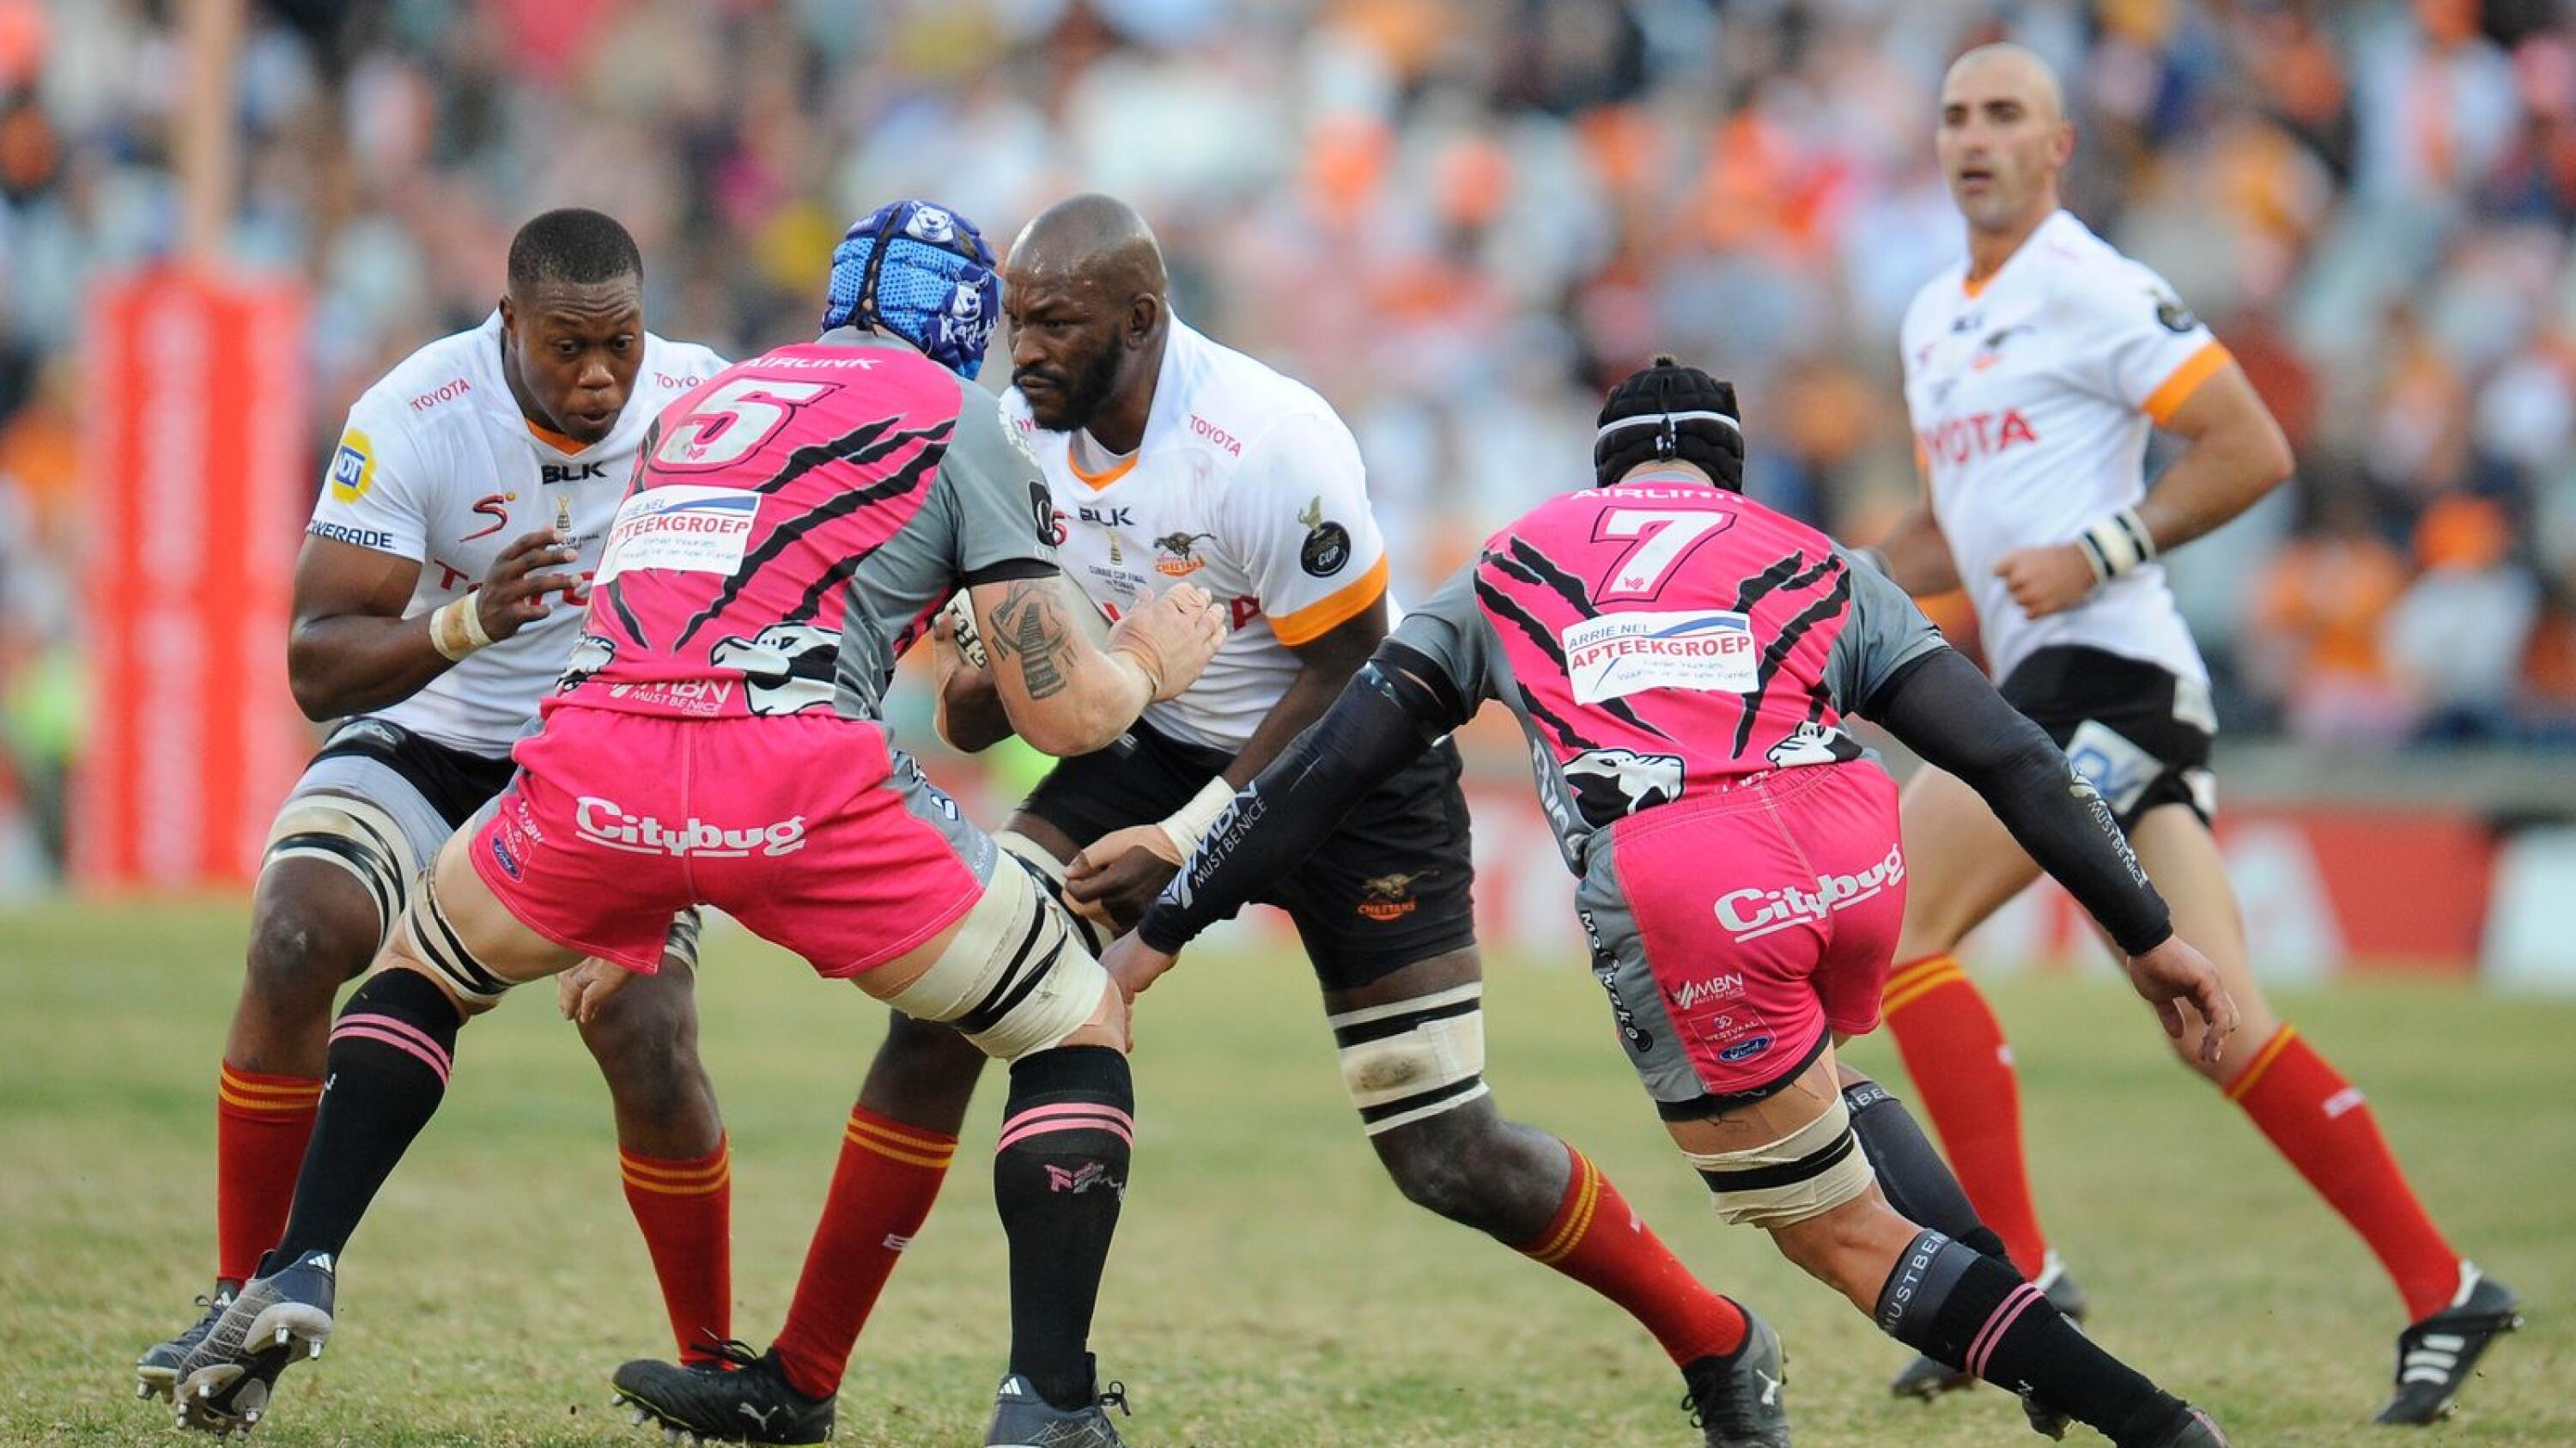 Victor Sekeketeof the Free State Cheetahs carries the ball during their Currie Cup Final clash against the Pumas at Free State Stadium in Bloemfontein on Saturday